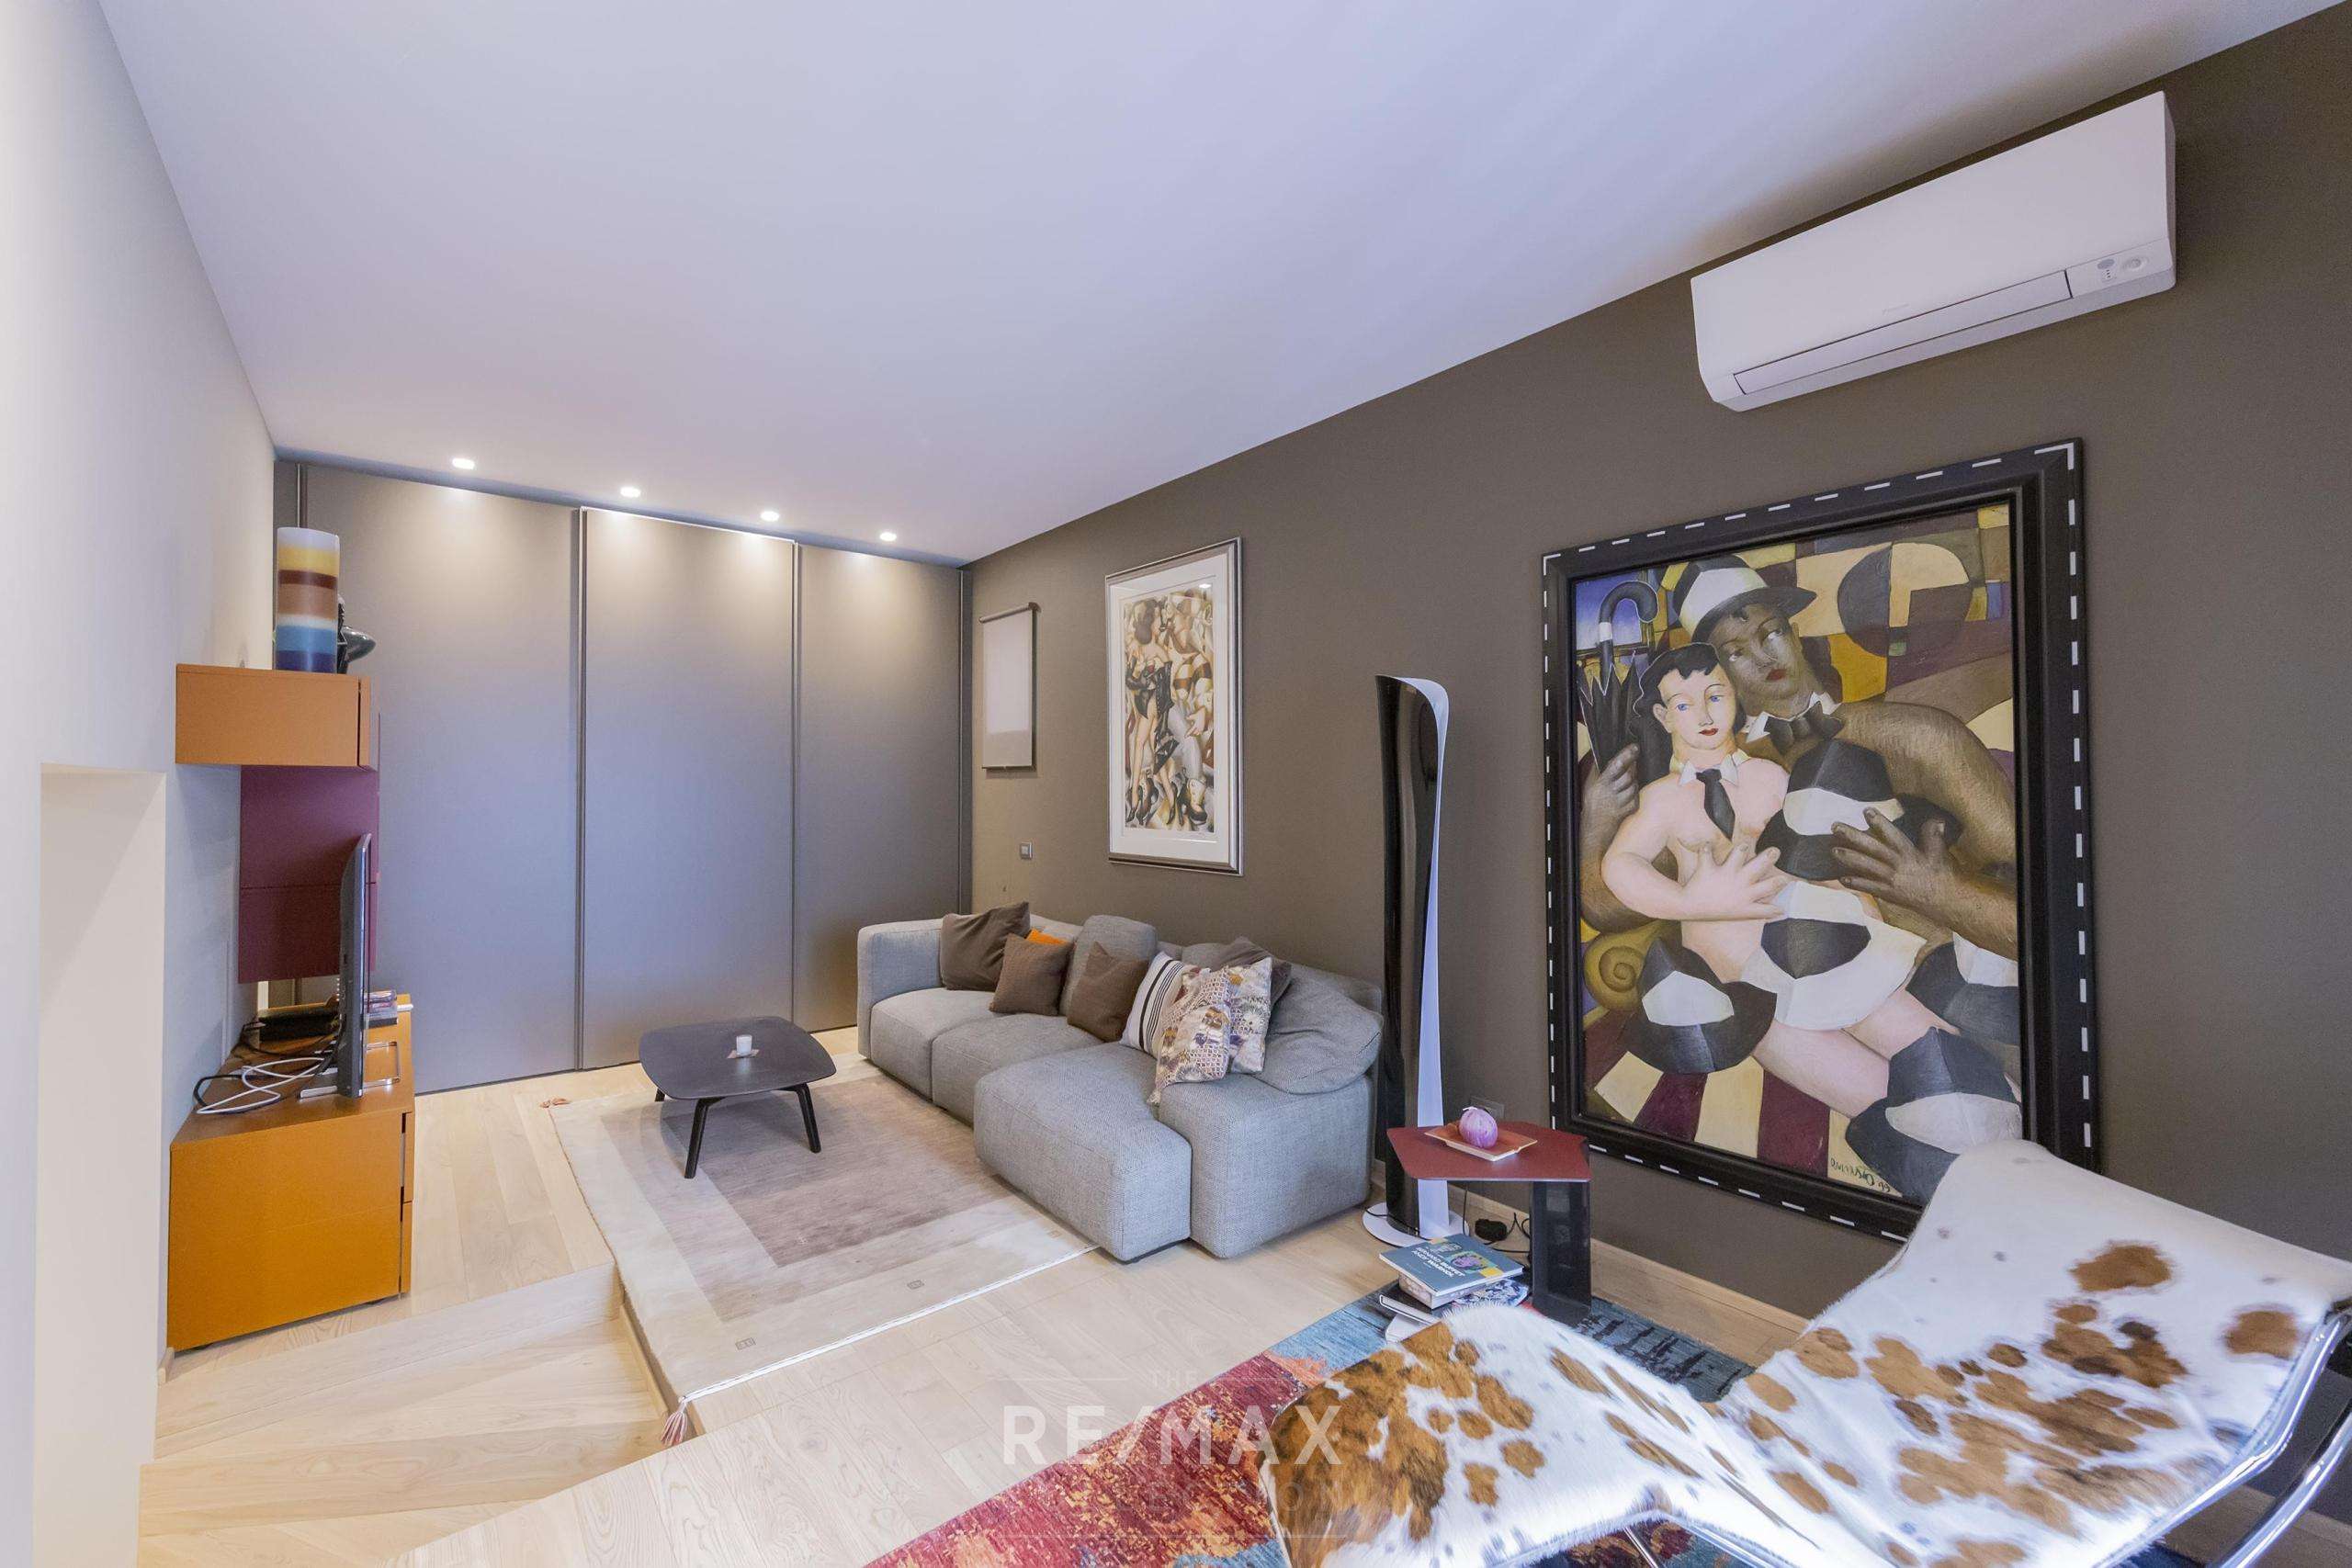 new-and-prestigious-apartment-renovated-with-garage-area-city-life-milan